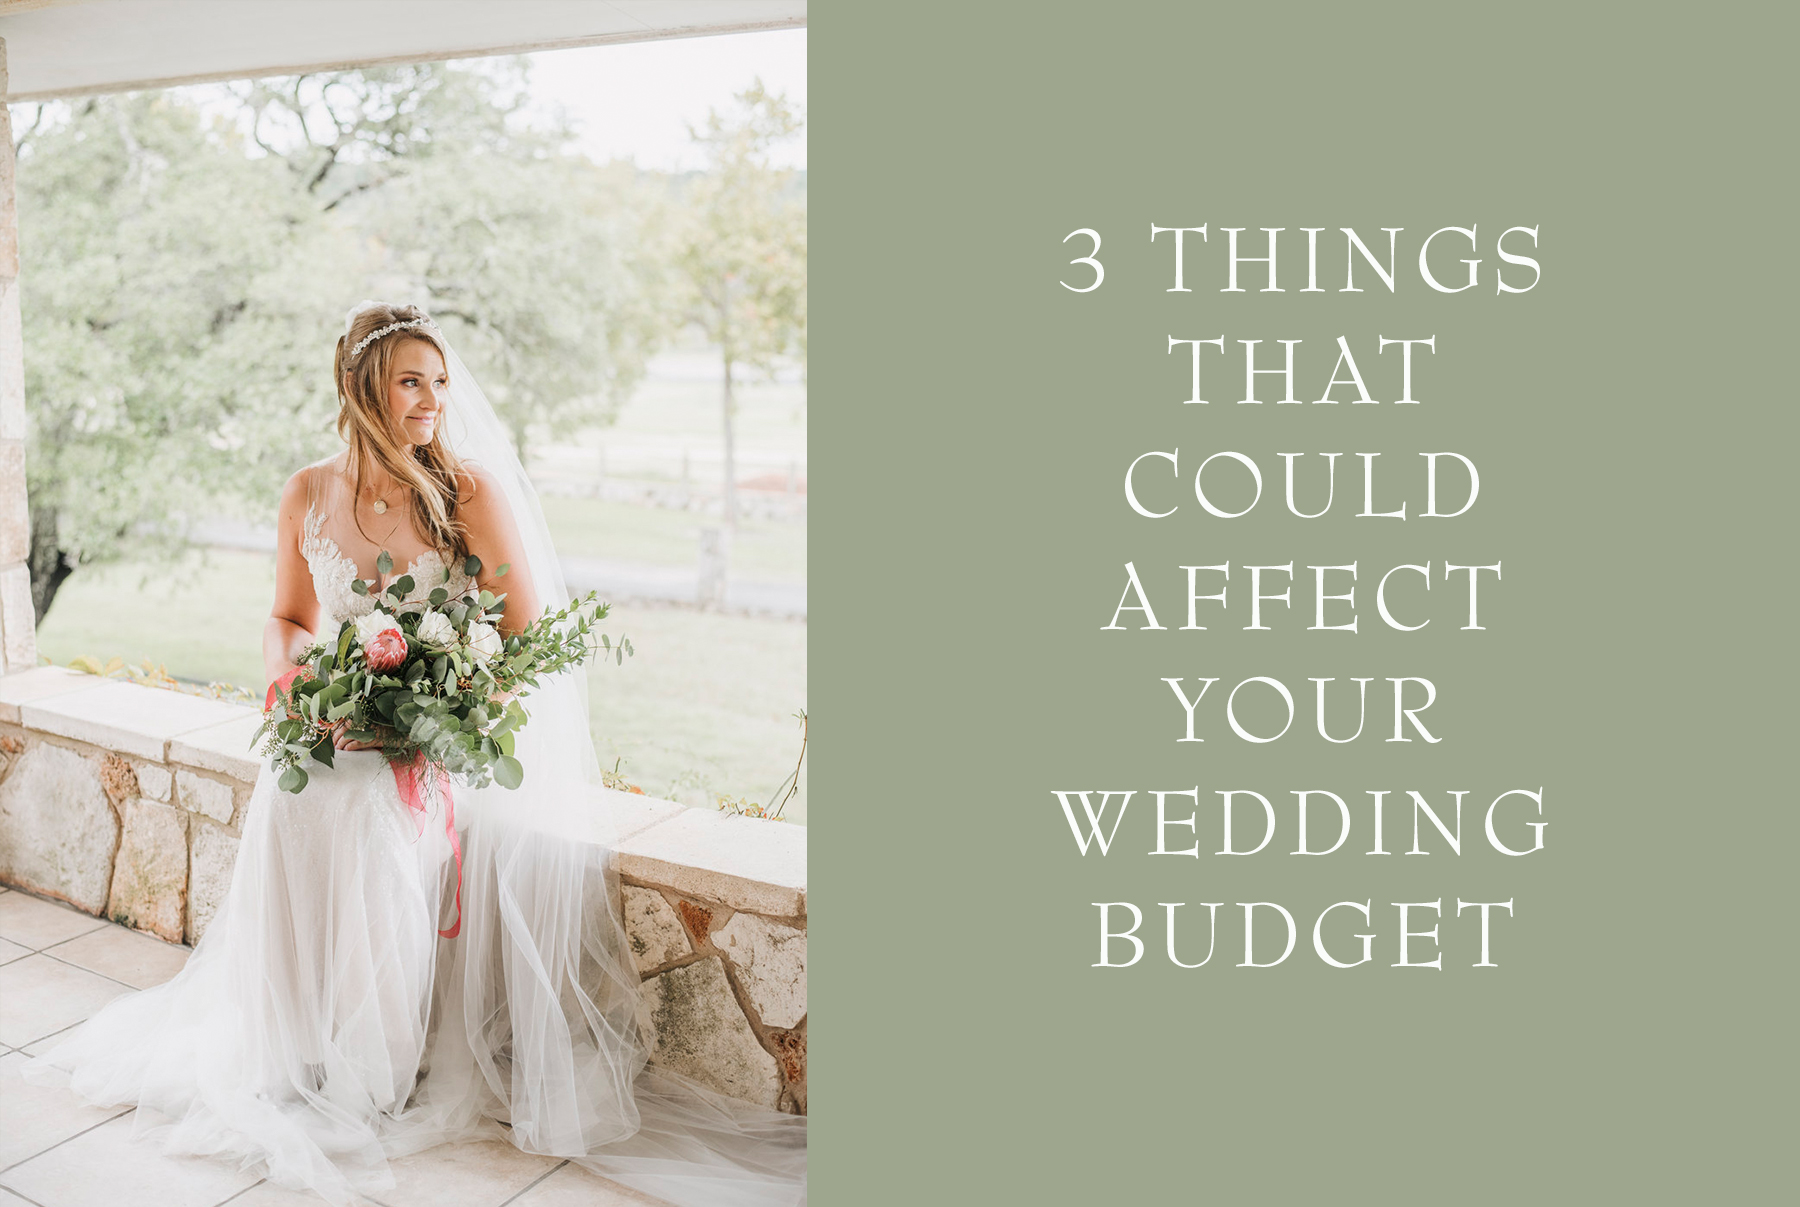 3 Things That Could Affect Your Wedding Budget